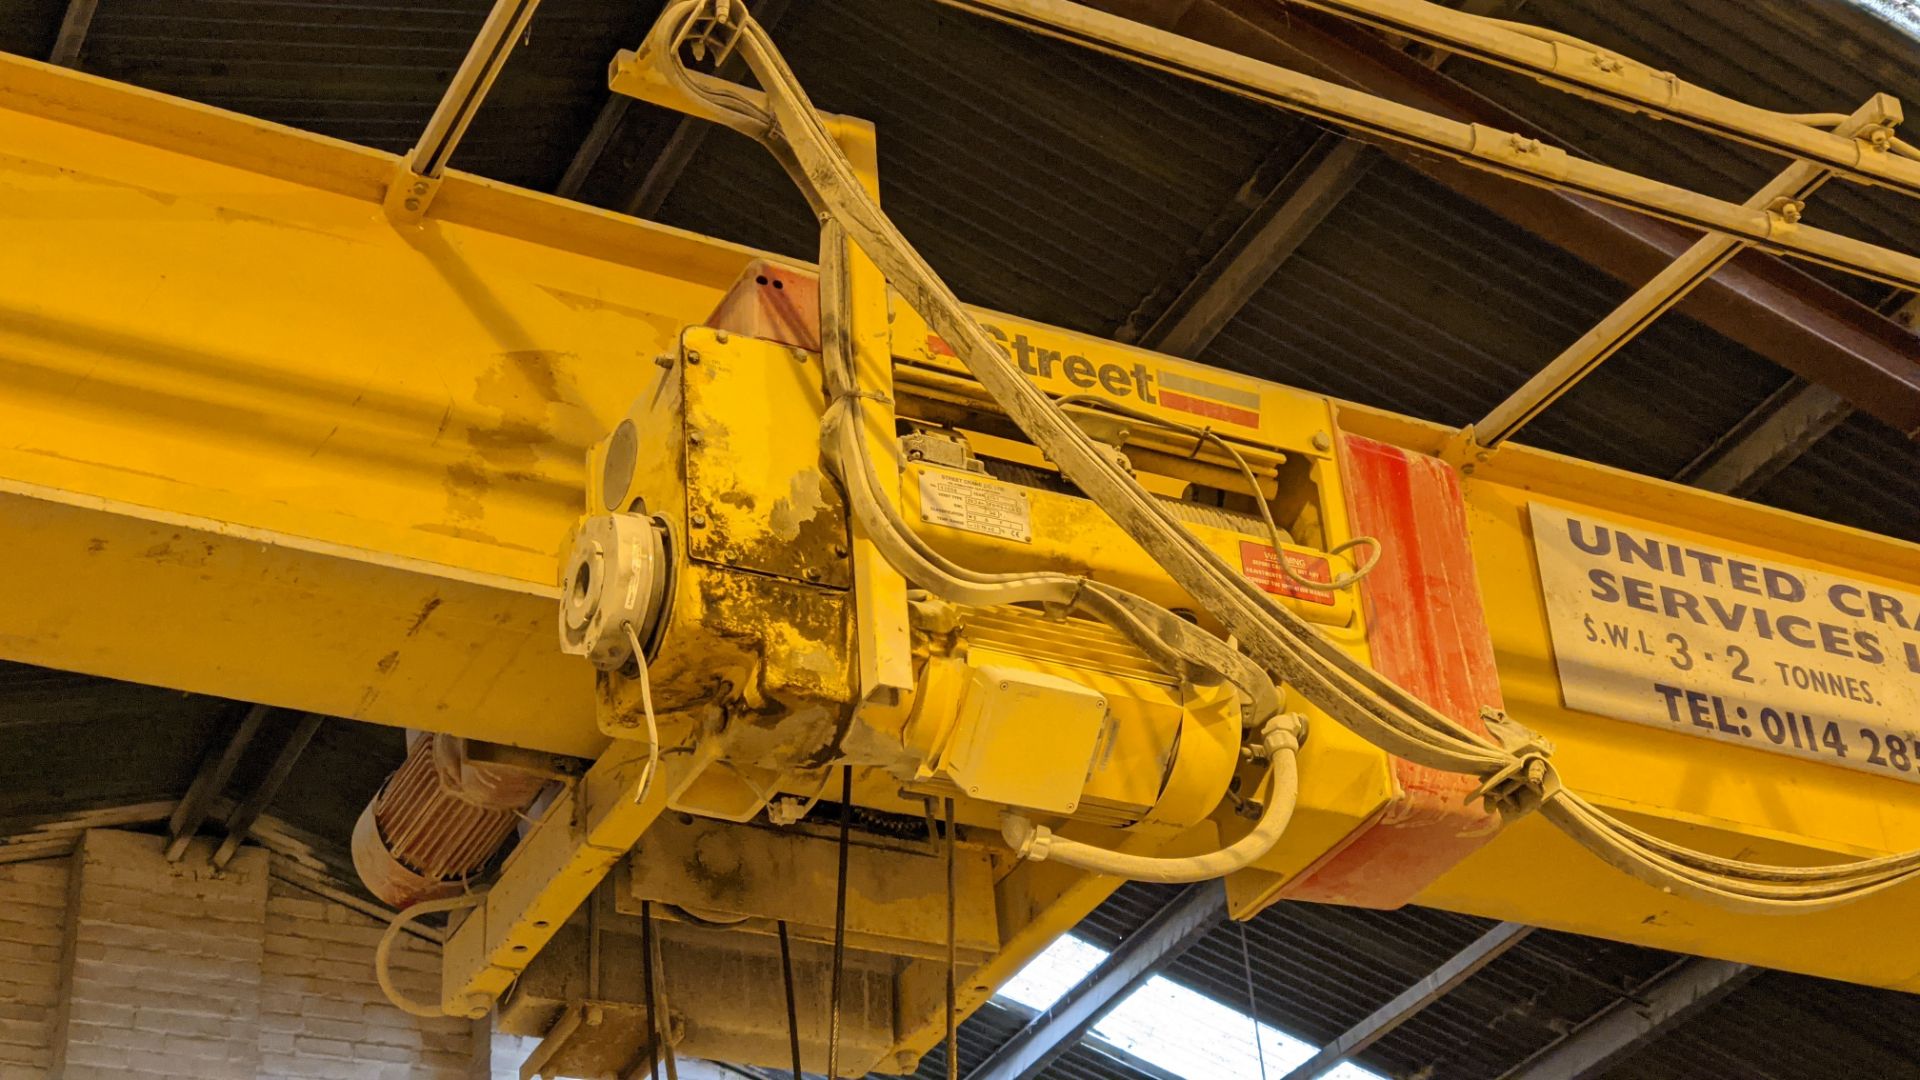 2001 Street overhead travelling crane with 3.2tonne capacity. Serial no. 11006. This lot comprises t - Image 11 of 28